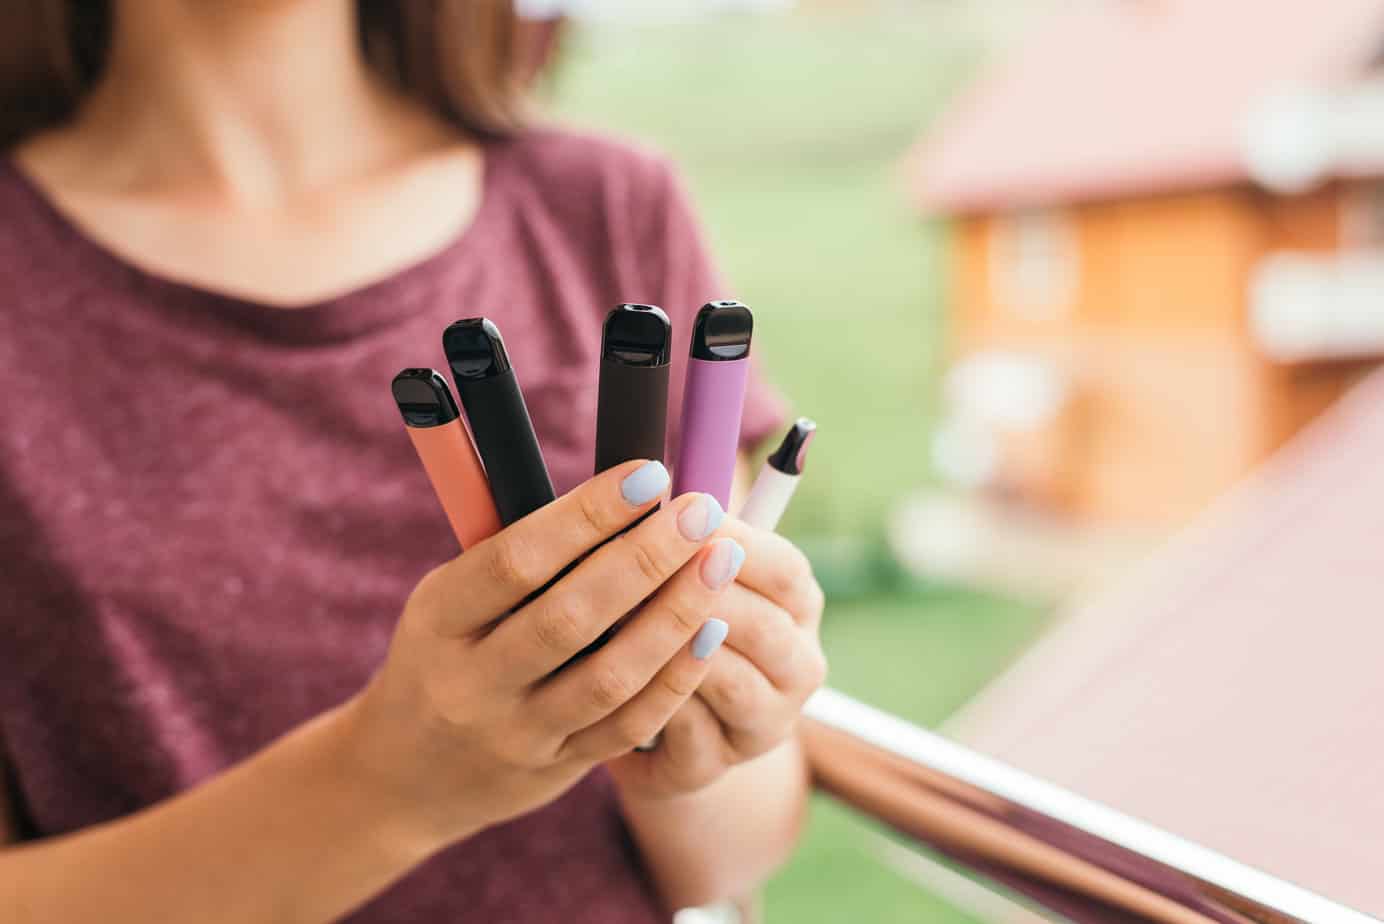 Woman's hands holding various types of disposable e-cigarettes.